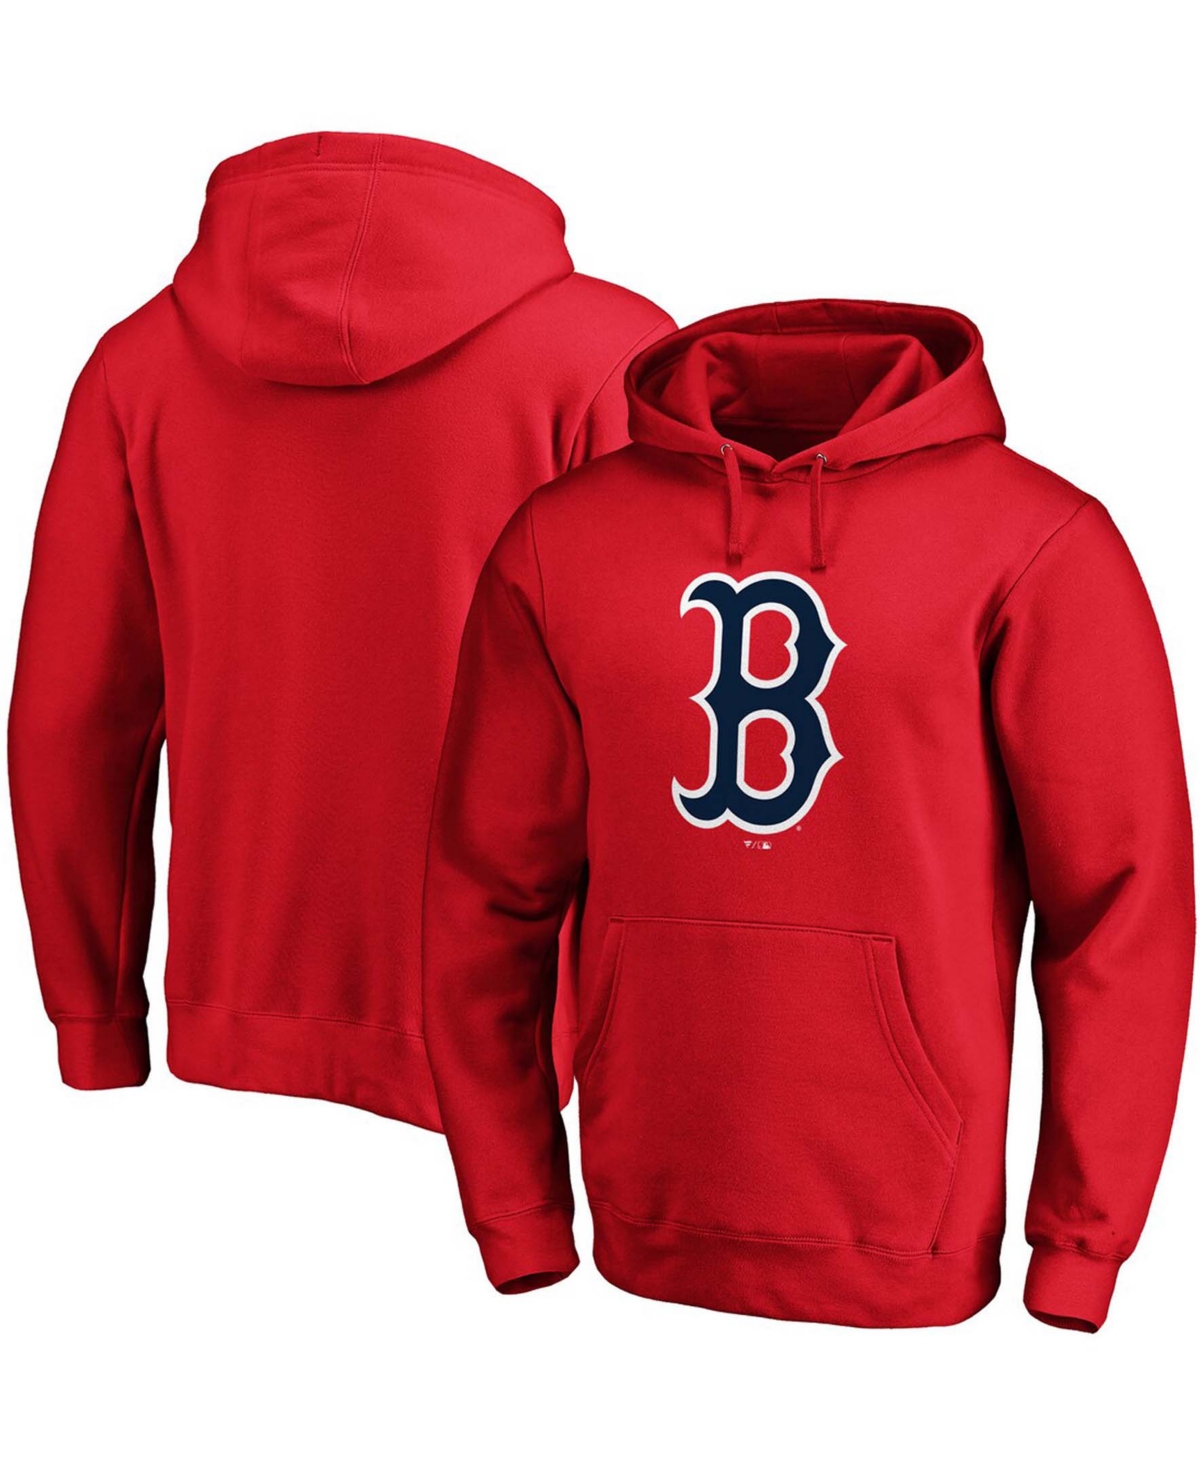 Men's Red Boston Red Sox Official Logo Pullover Hoodie - Red